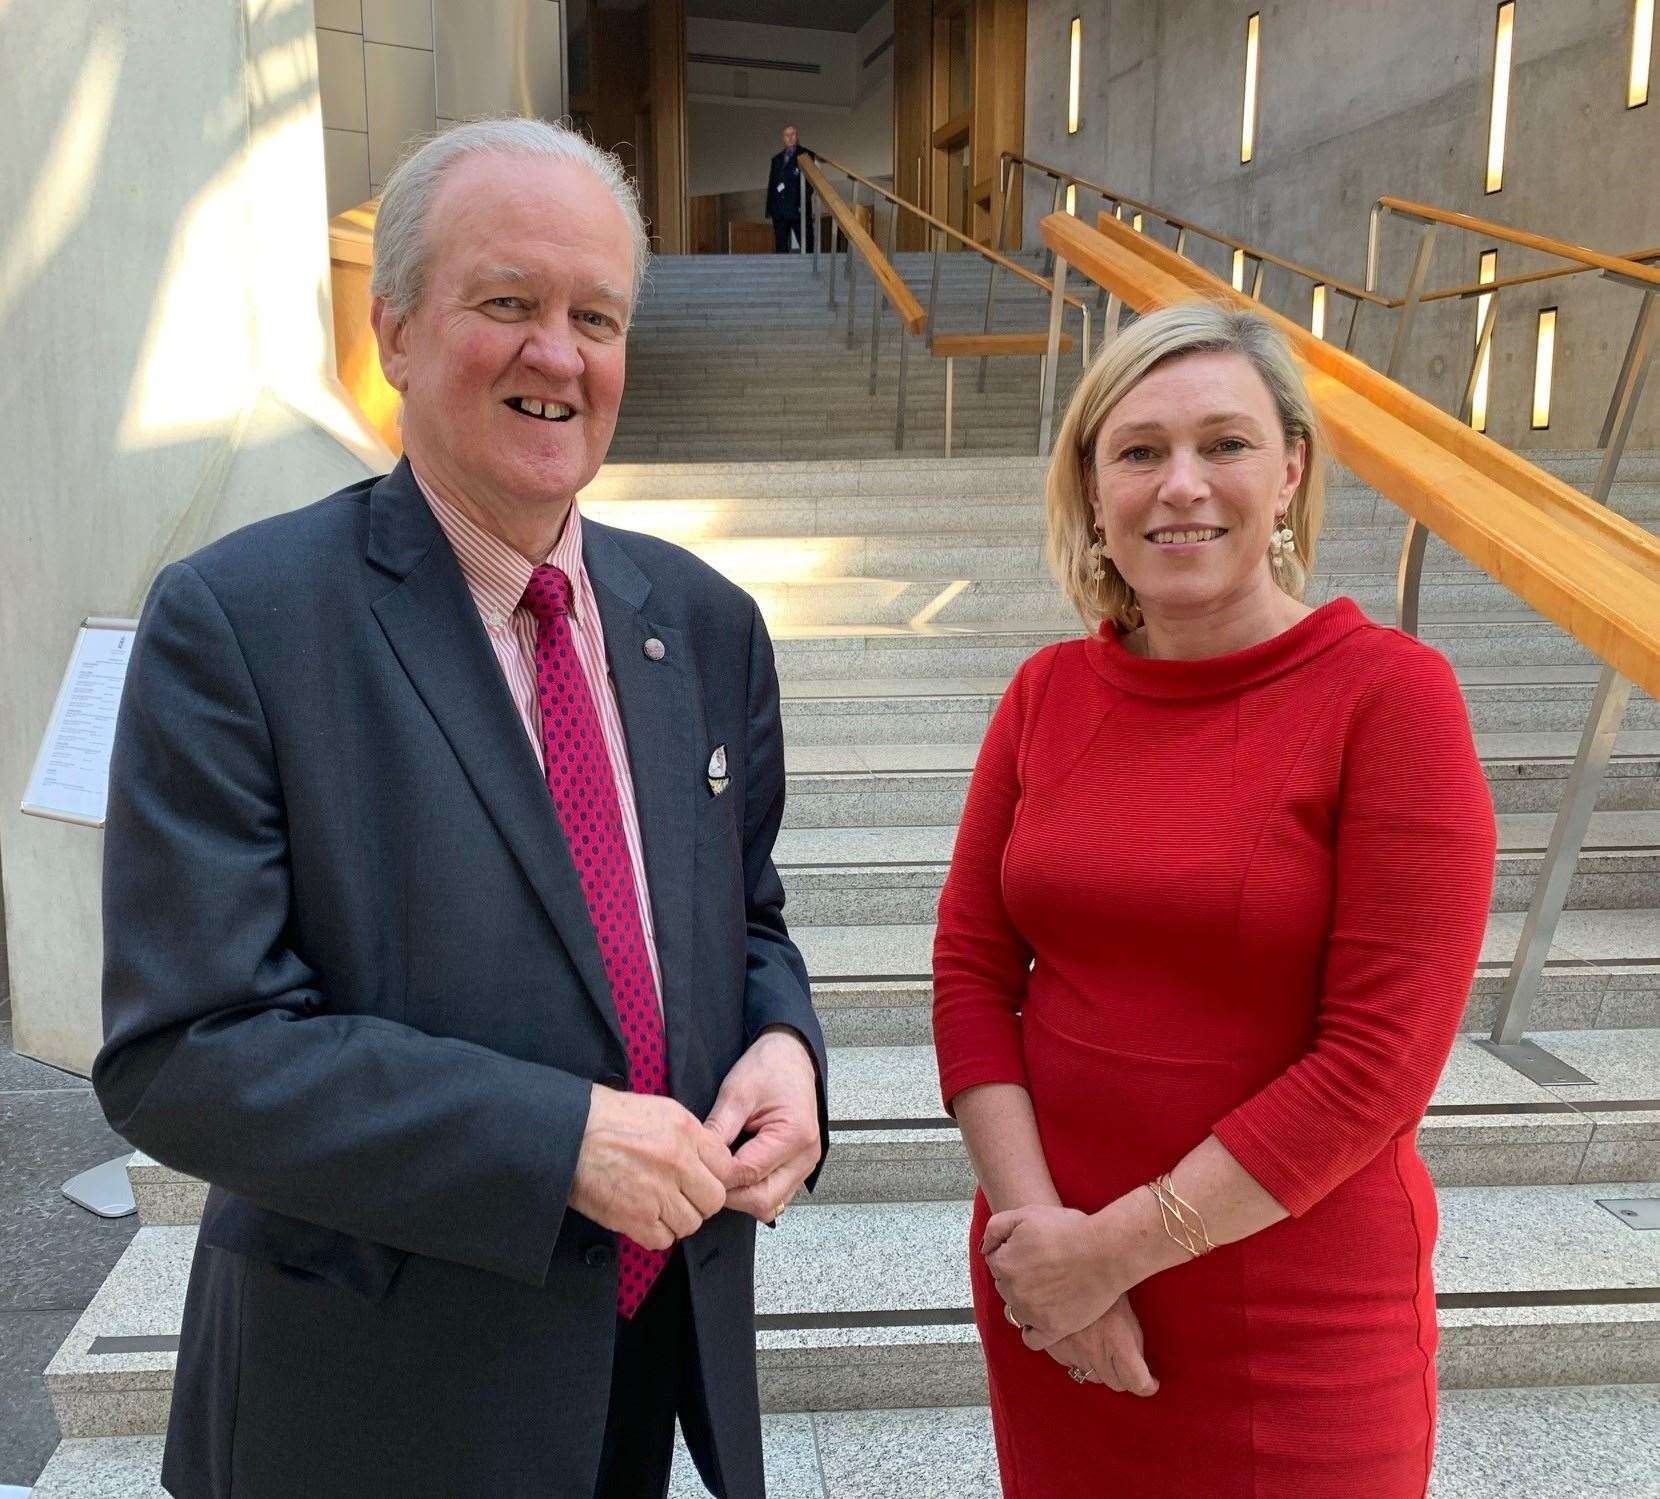 Pictured before the current lockdown, MSP Stewart Stevenson with fellow MSP Gillian Martin who gave the first proxy speech at Holyrood on his behalf.